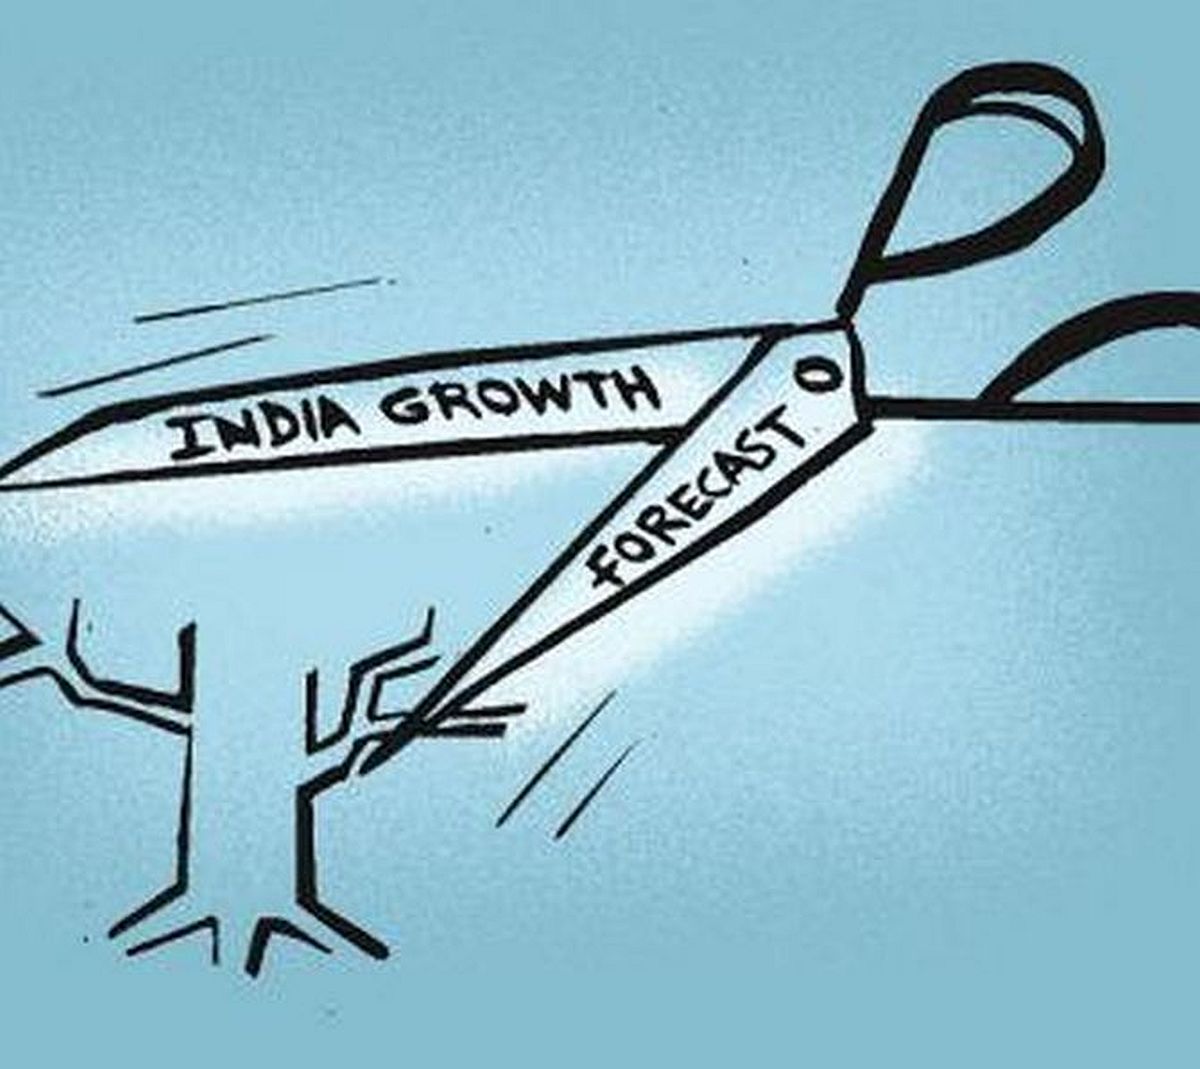 India's GDP estimated to grow at 7% in 2022-23